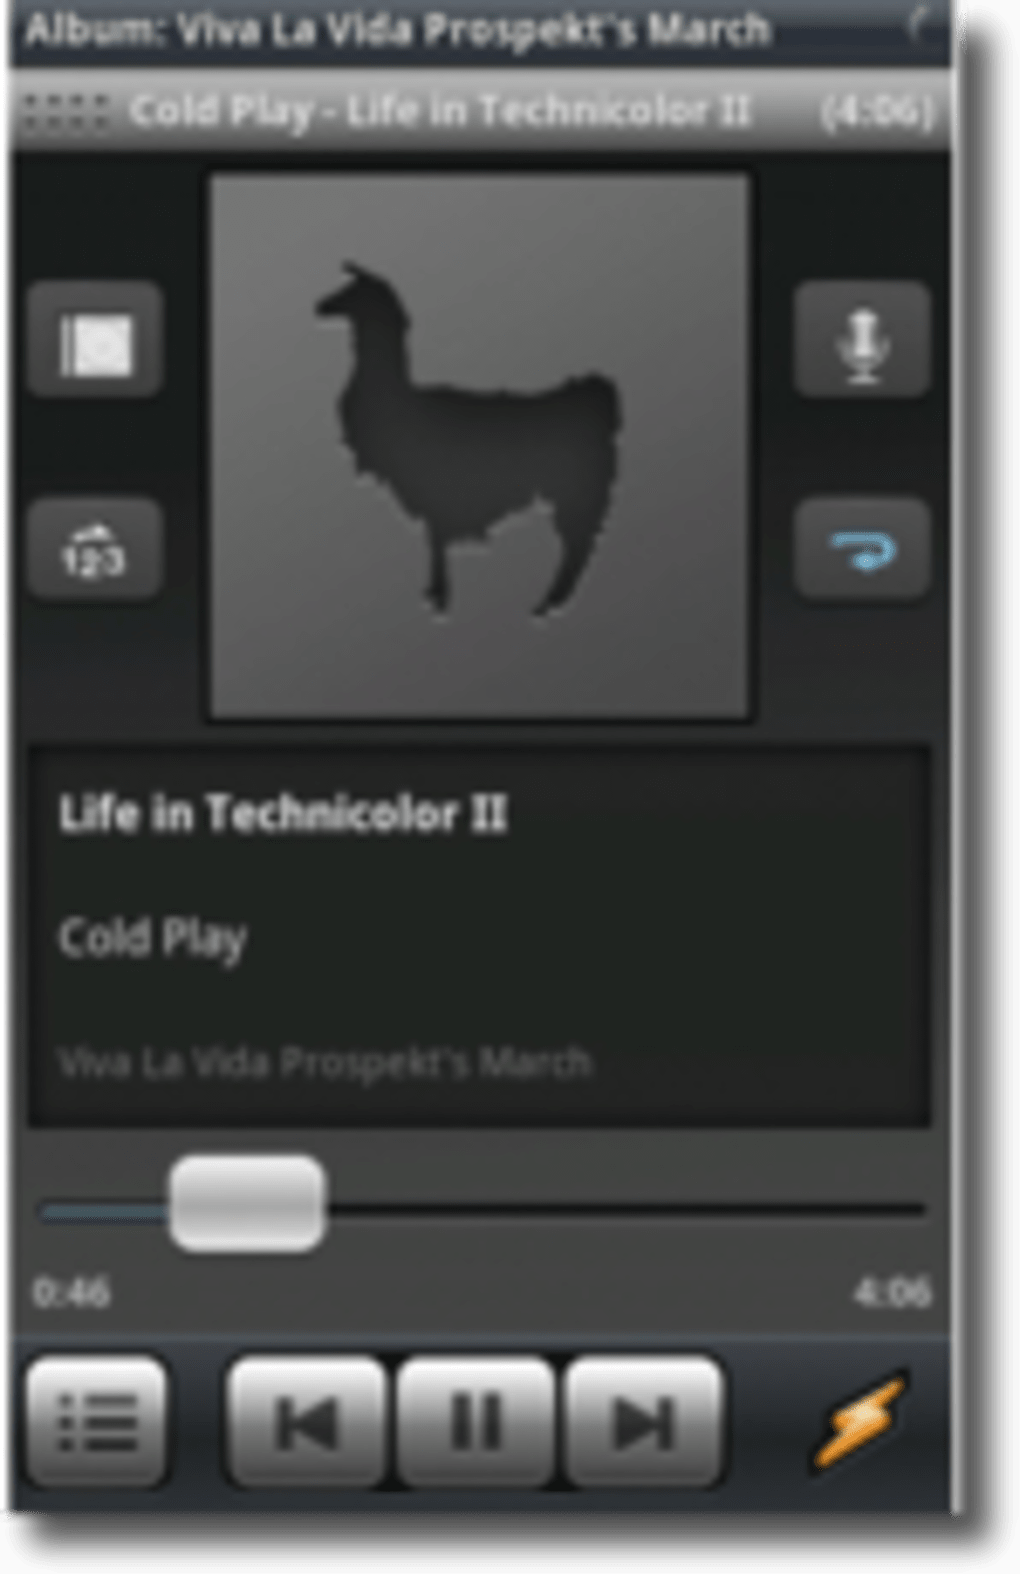 winamp for android mobile